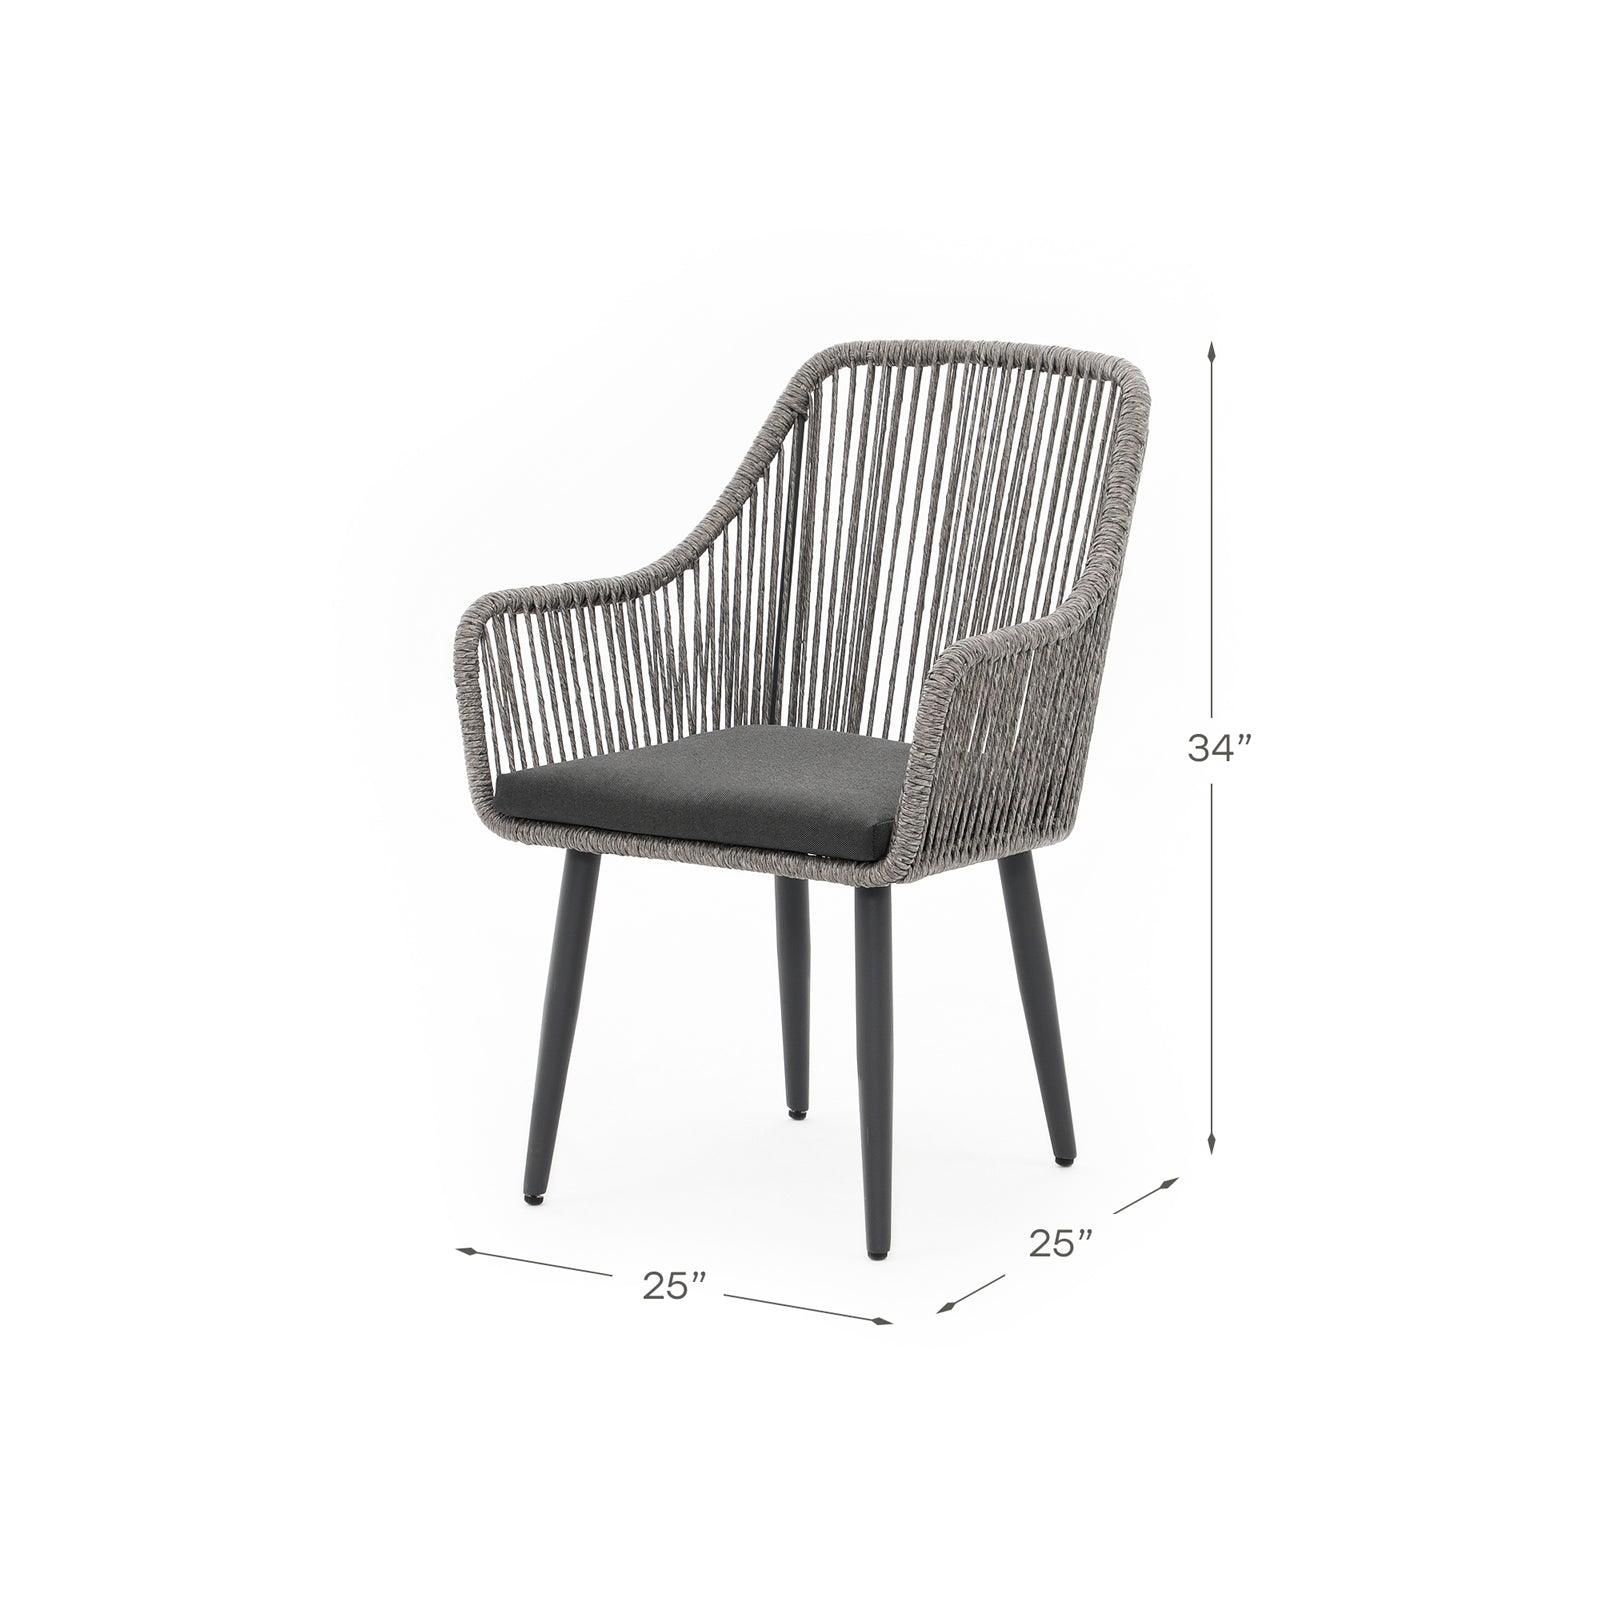 Hallerbos grey rattan Dining Chair with steel frame and cushion, dimension info- Jardina Furniture#Color_Grey